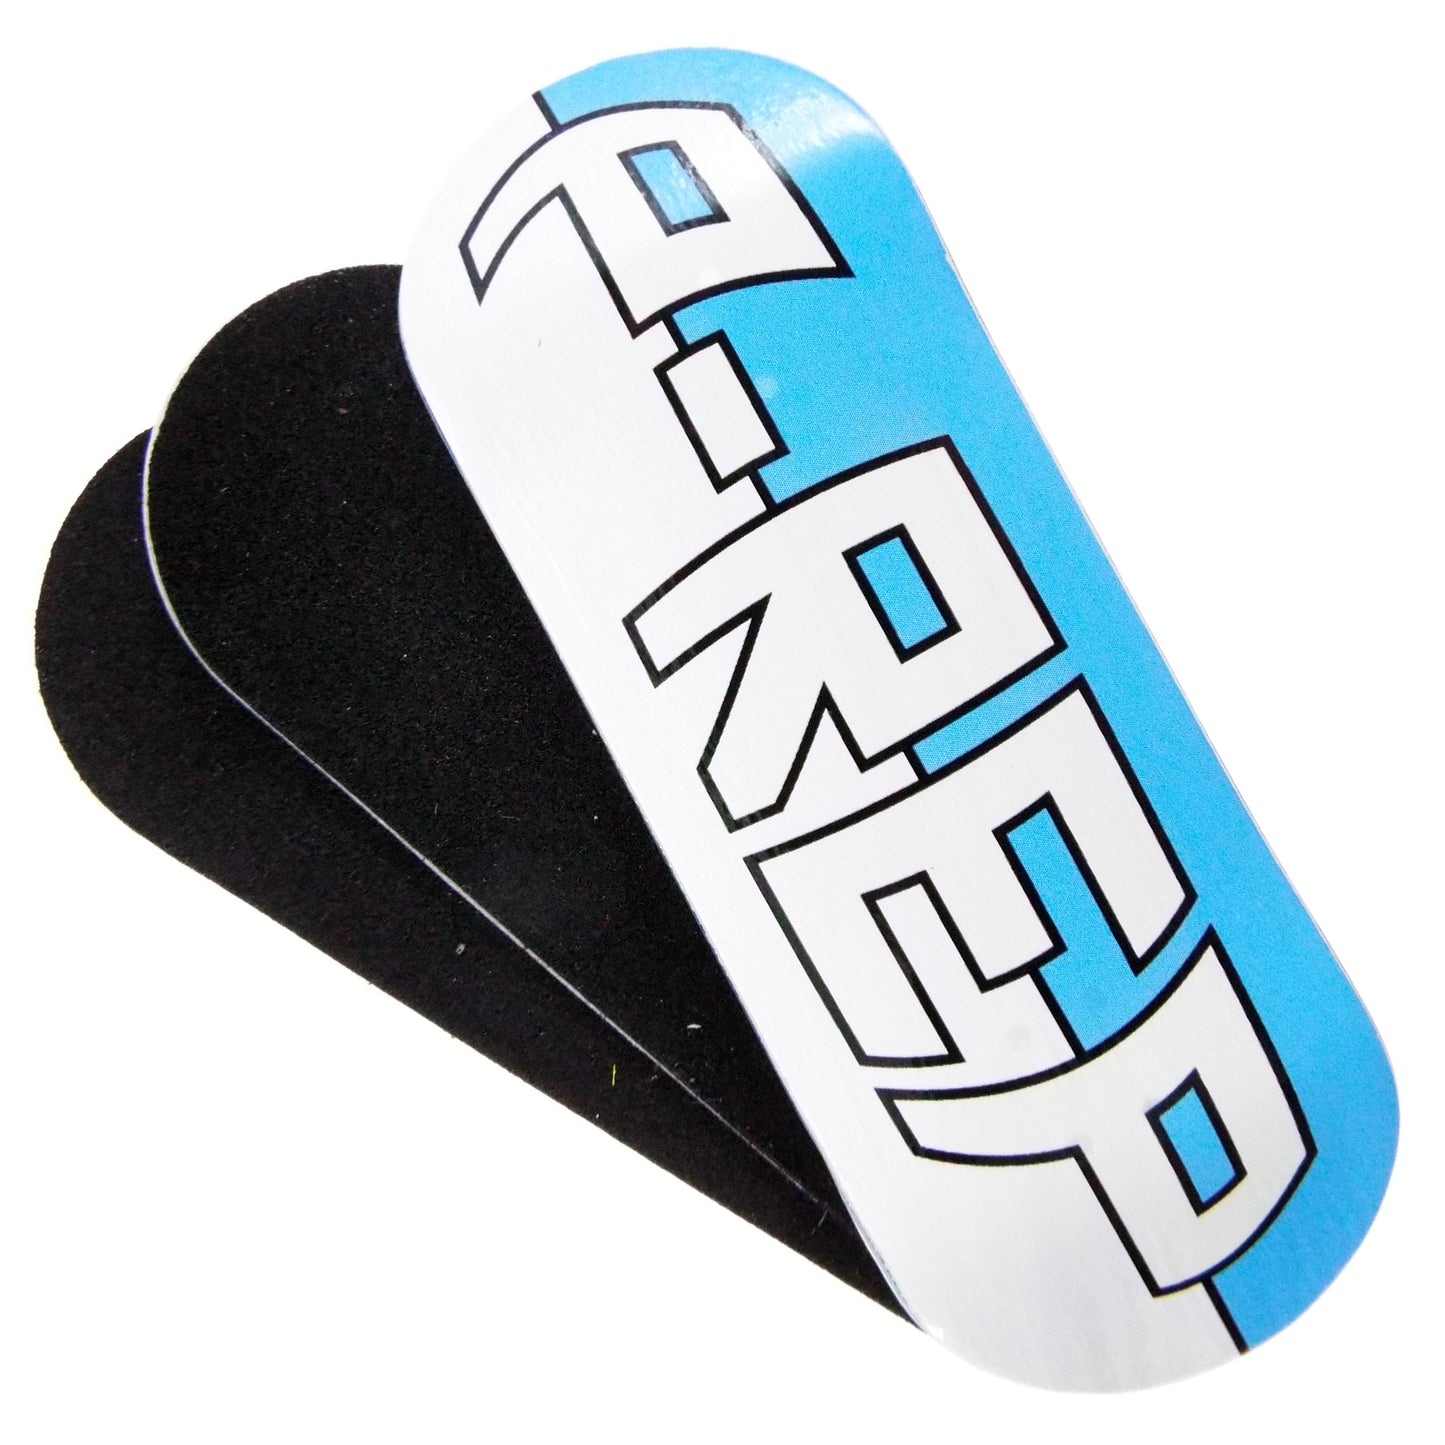 P-REP  34mm x 97mm Graphic Deck - Large logo